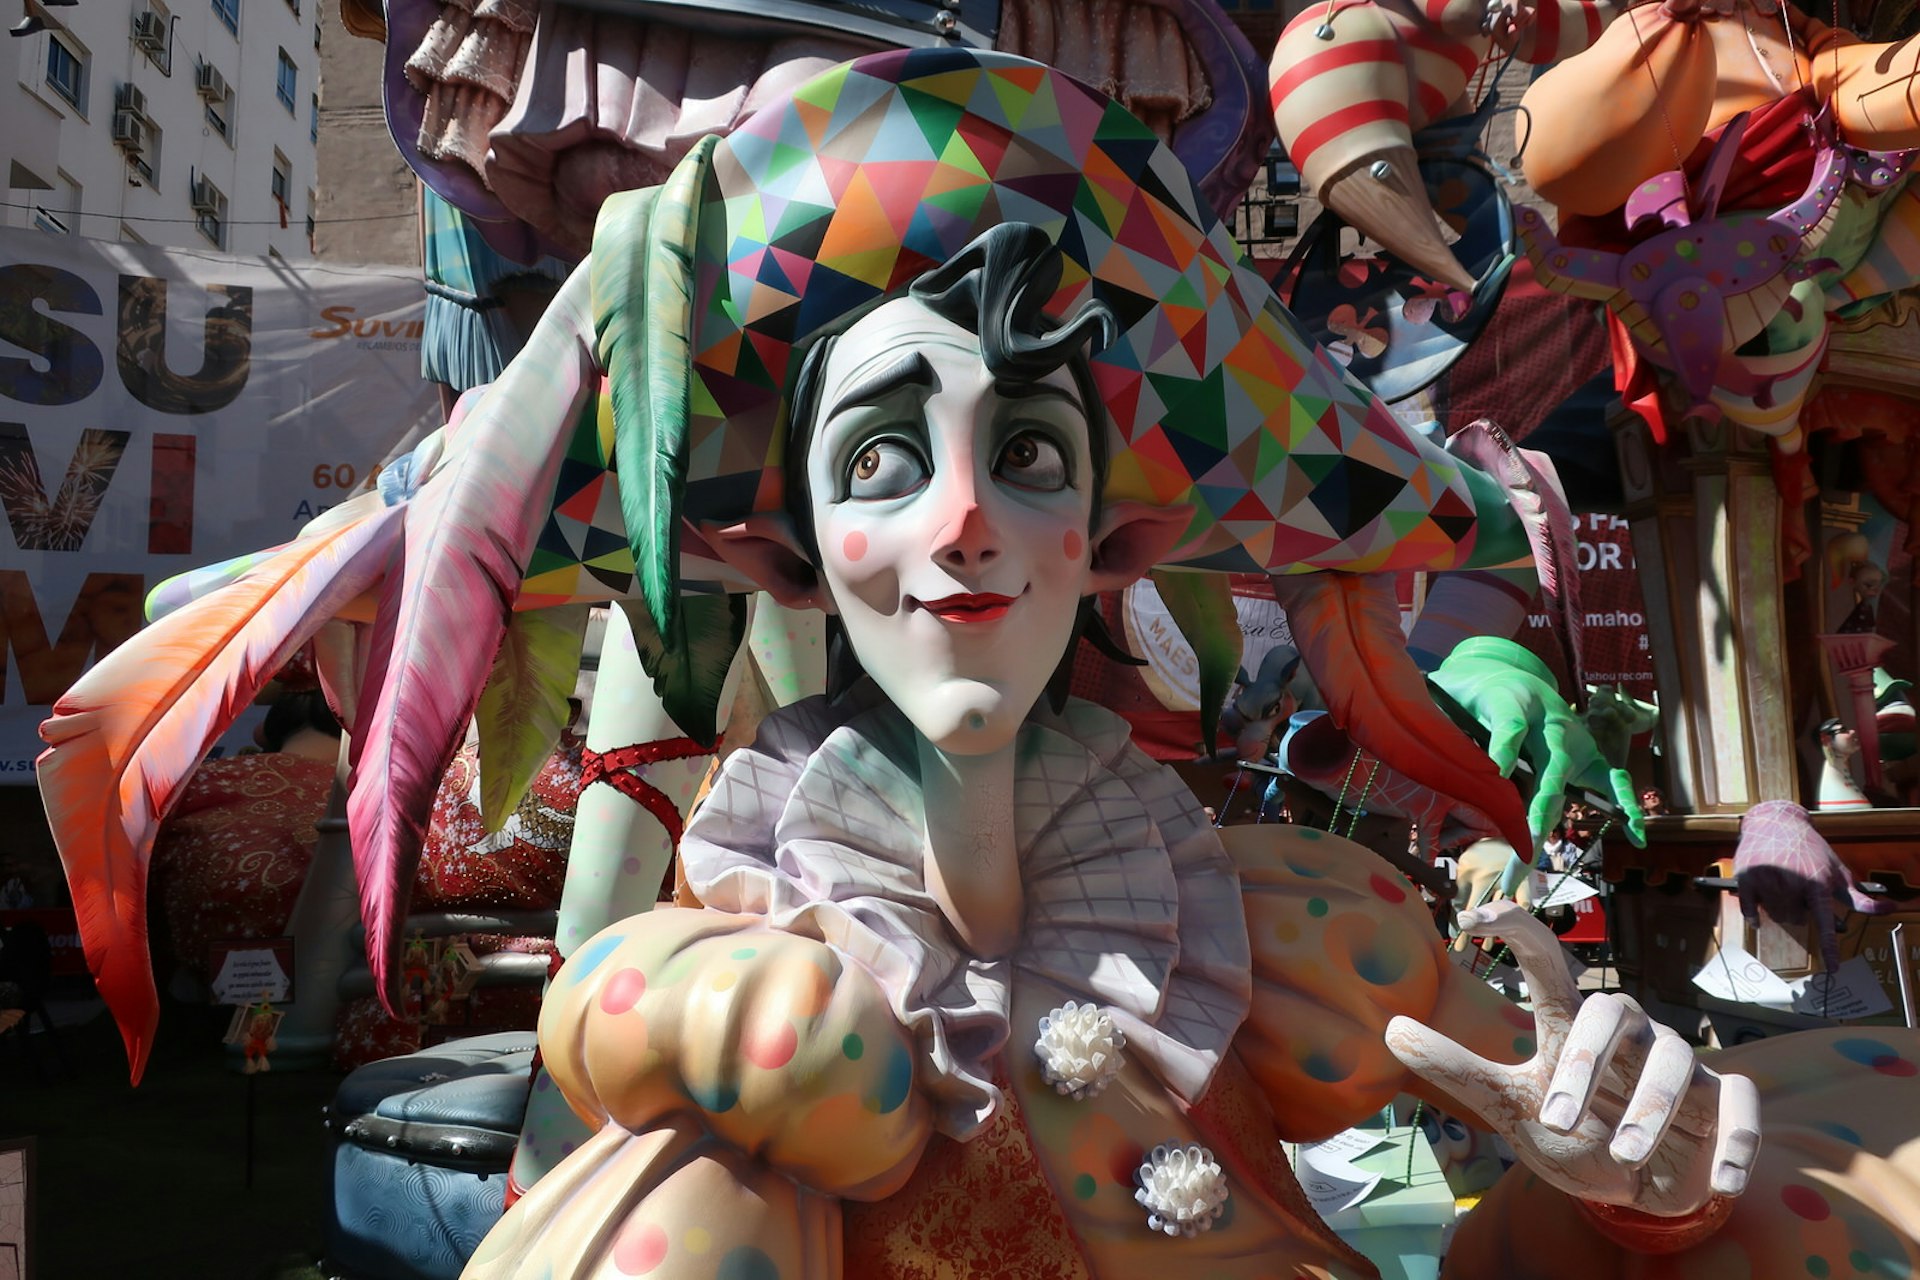 Close-up of a colourful falla sculpture of a clown wearing a large hat with feathers